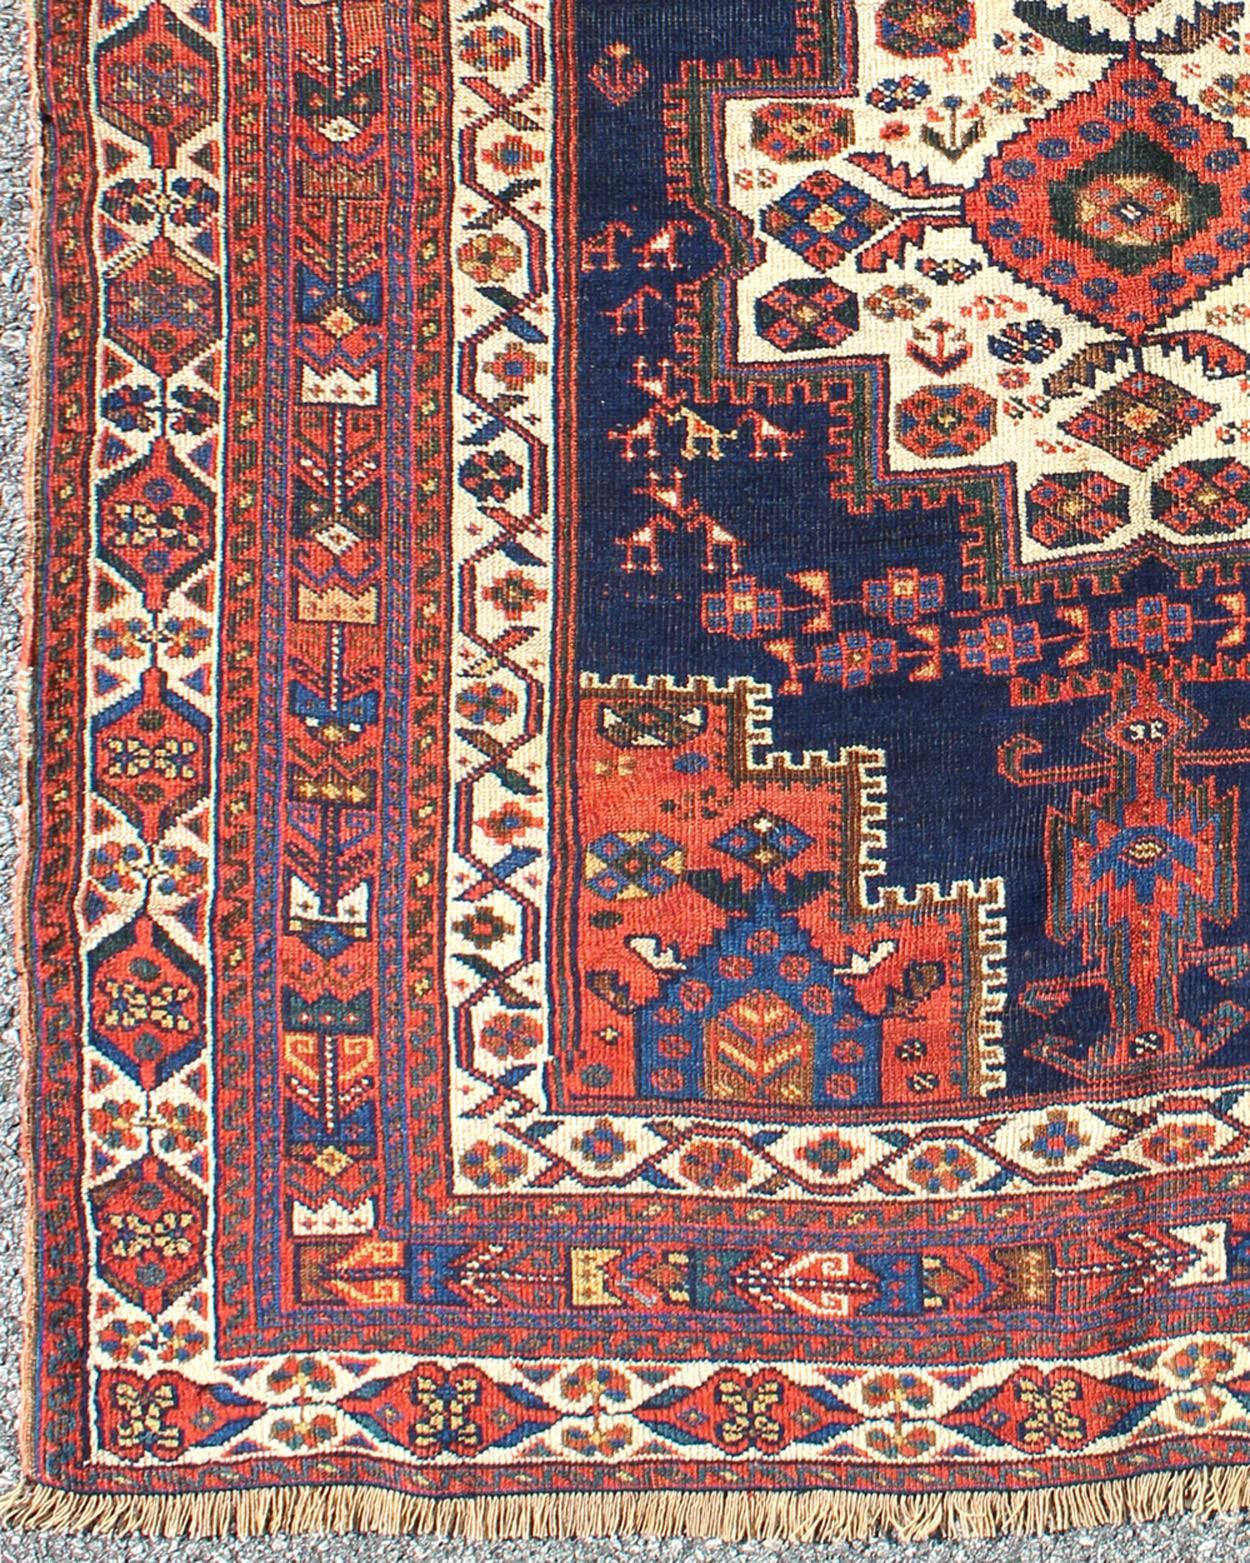 Bold geometry, rich symbolism and vivid, singular coloration contribute to the marvelous beauty of this stunning piece. Handwoven by Afshar tribal artists in southeastern Iran, the piece’s sophisticated artistry begins in the outer borders, evident